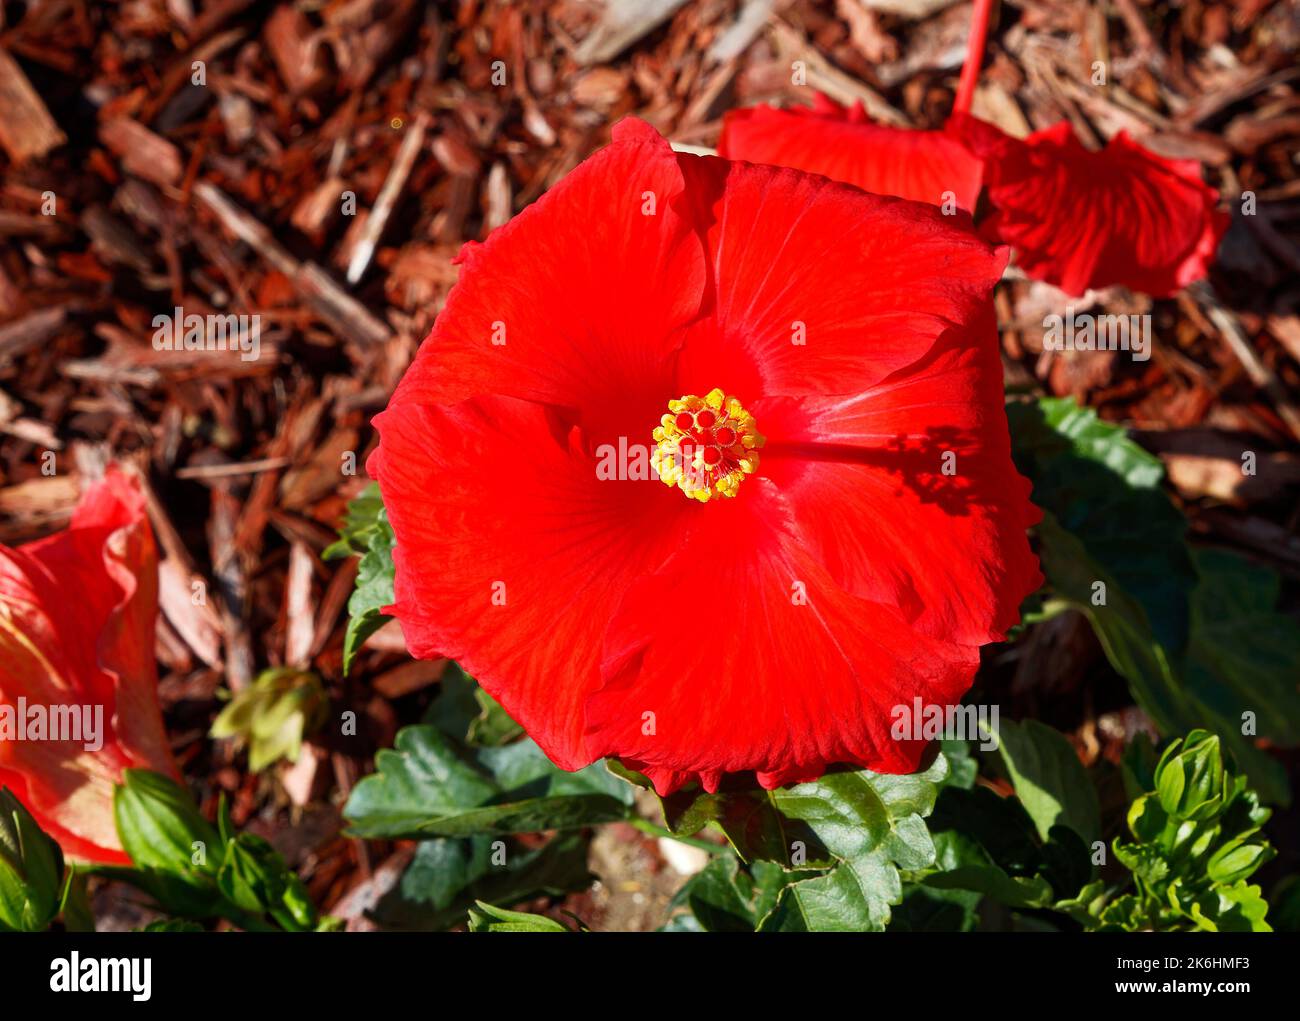 red hibiscus, flowering plant, close-up, view from top, yellow stamens, colorful, bright, Malvaceae family, nature, Florida Stock Photo